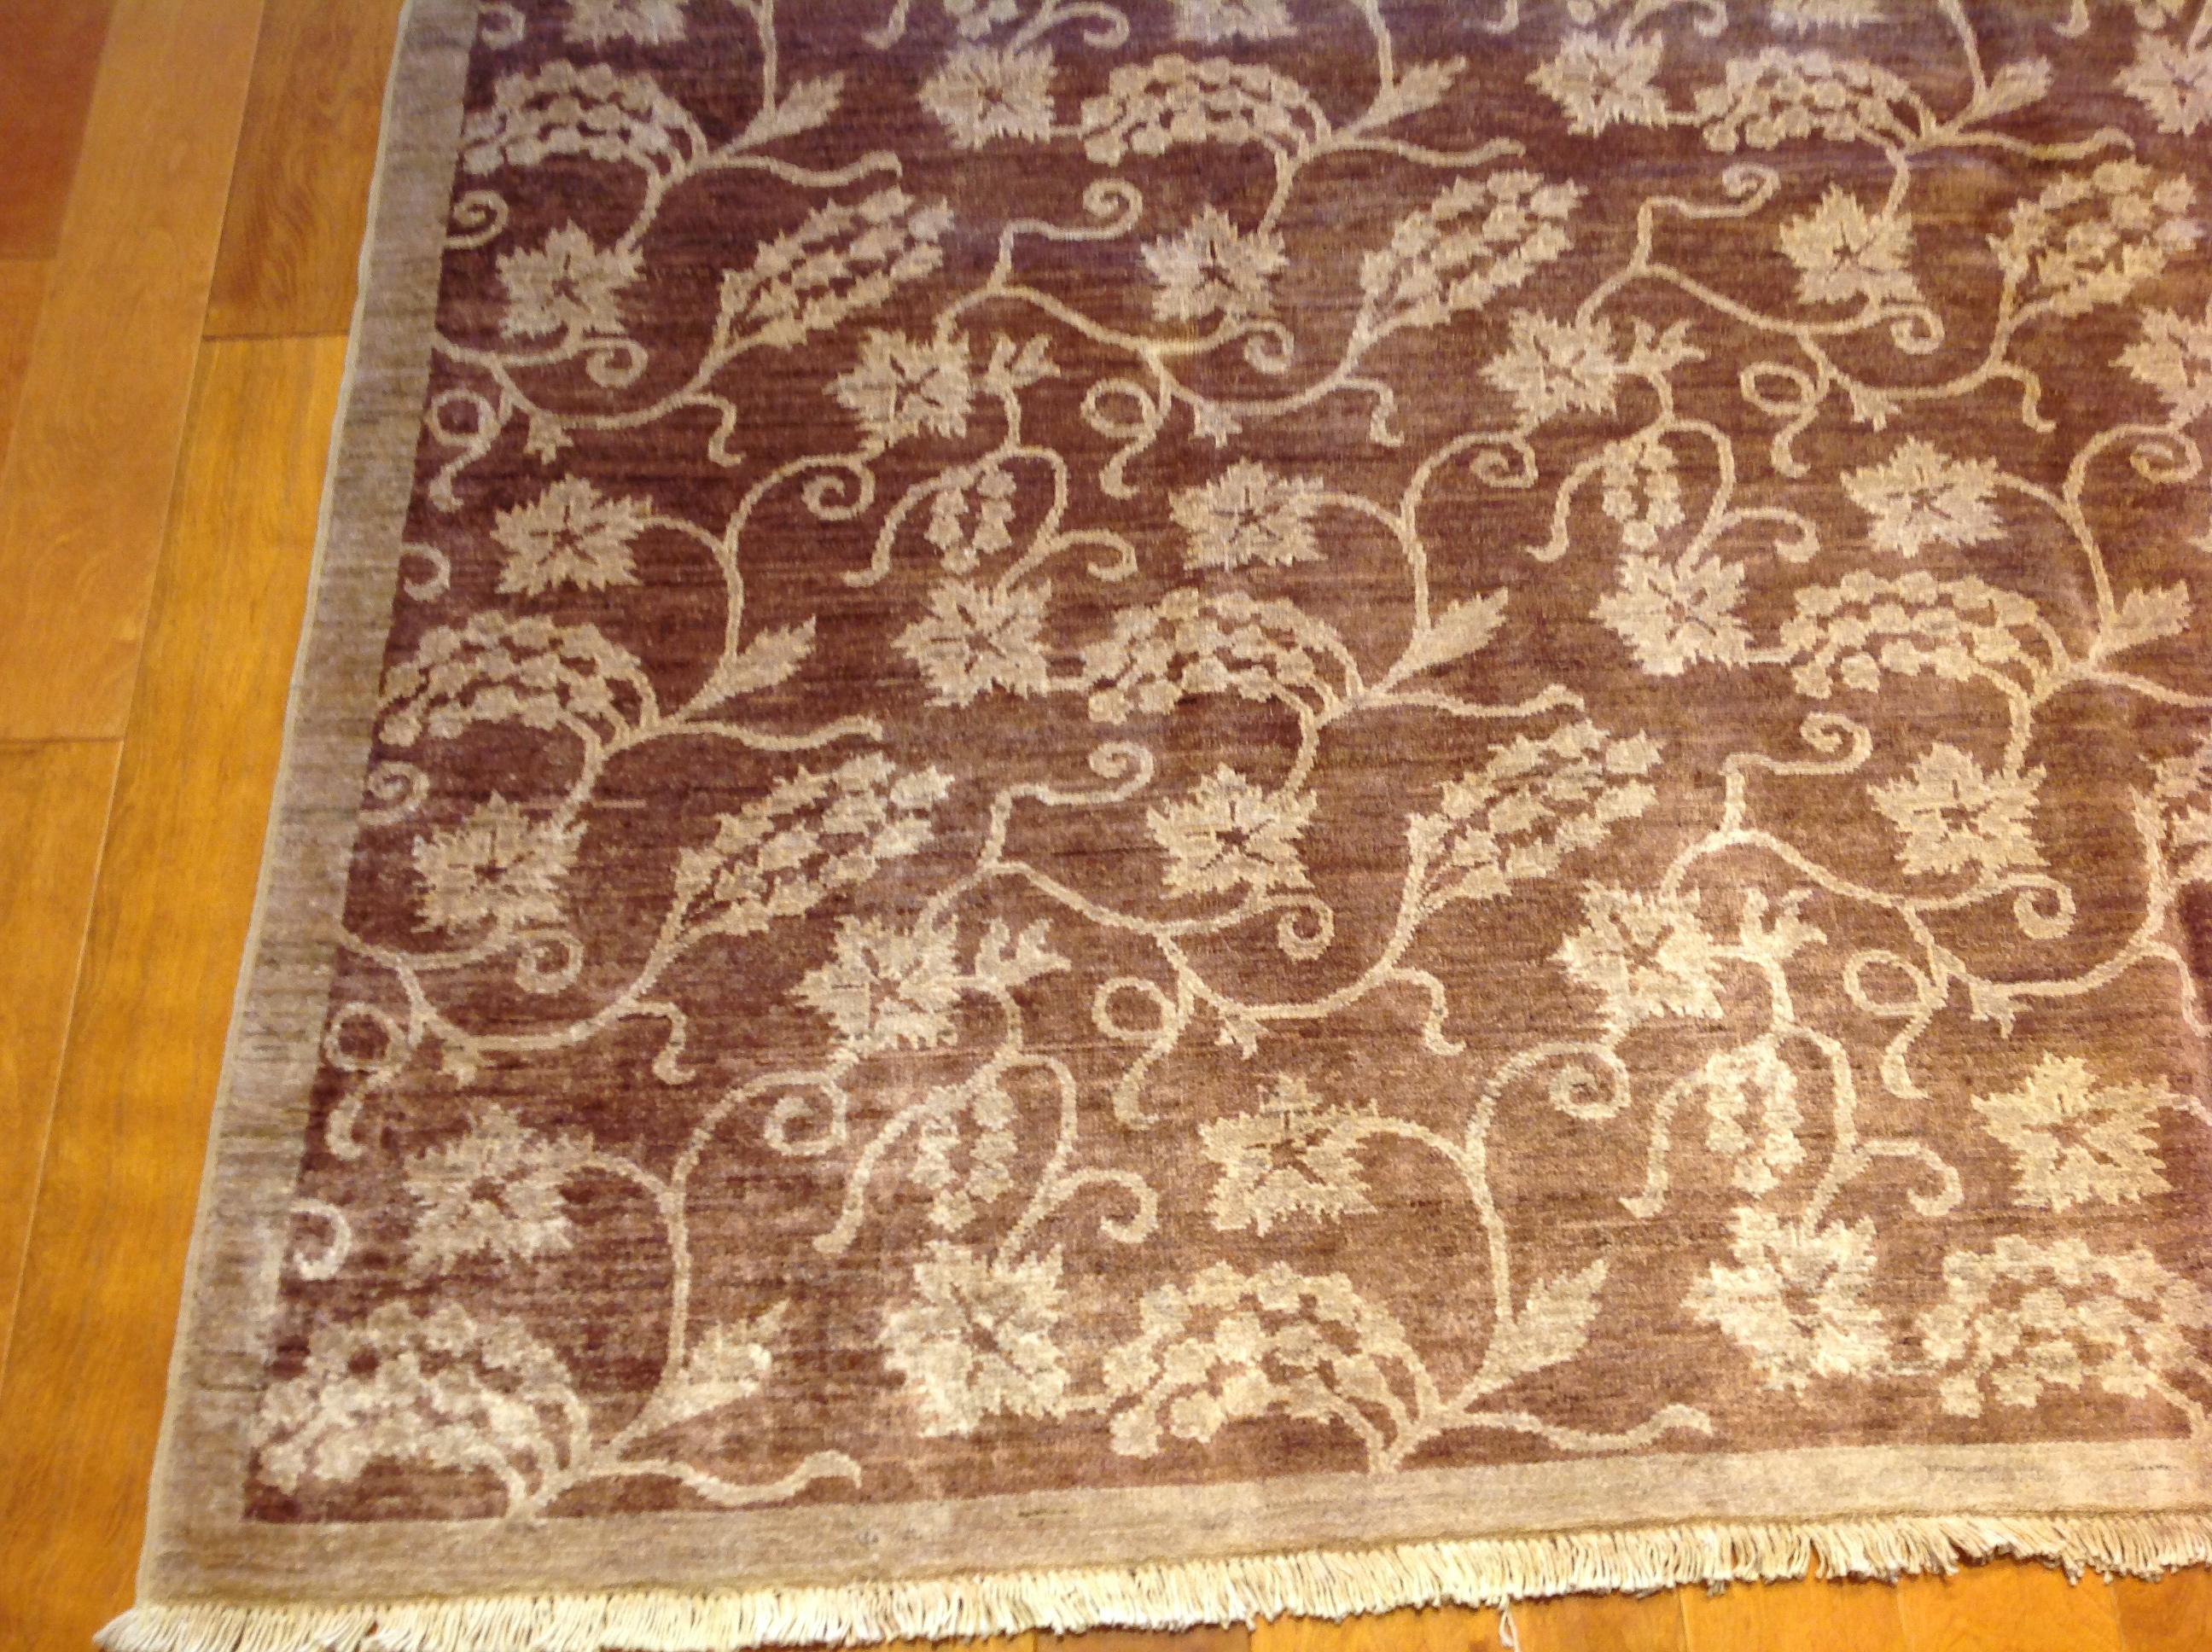 Hand-Knotted Floral All-Over Design Rug in Brown and Beige